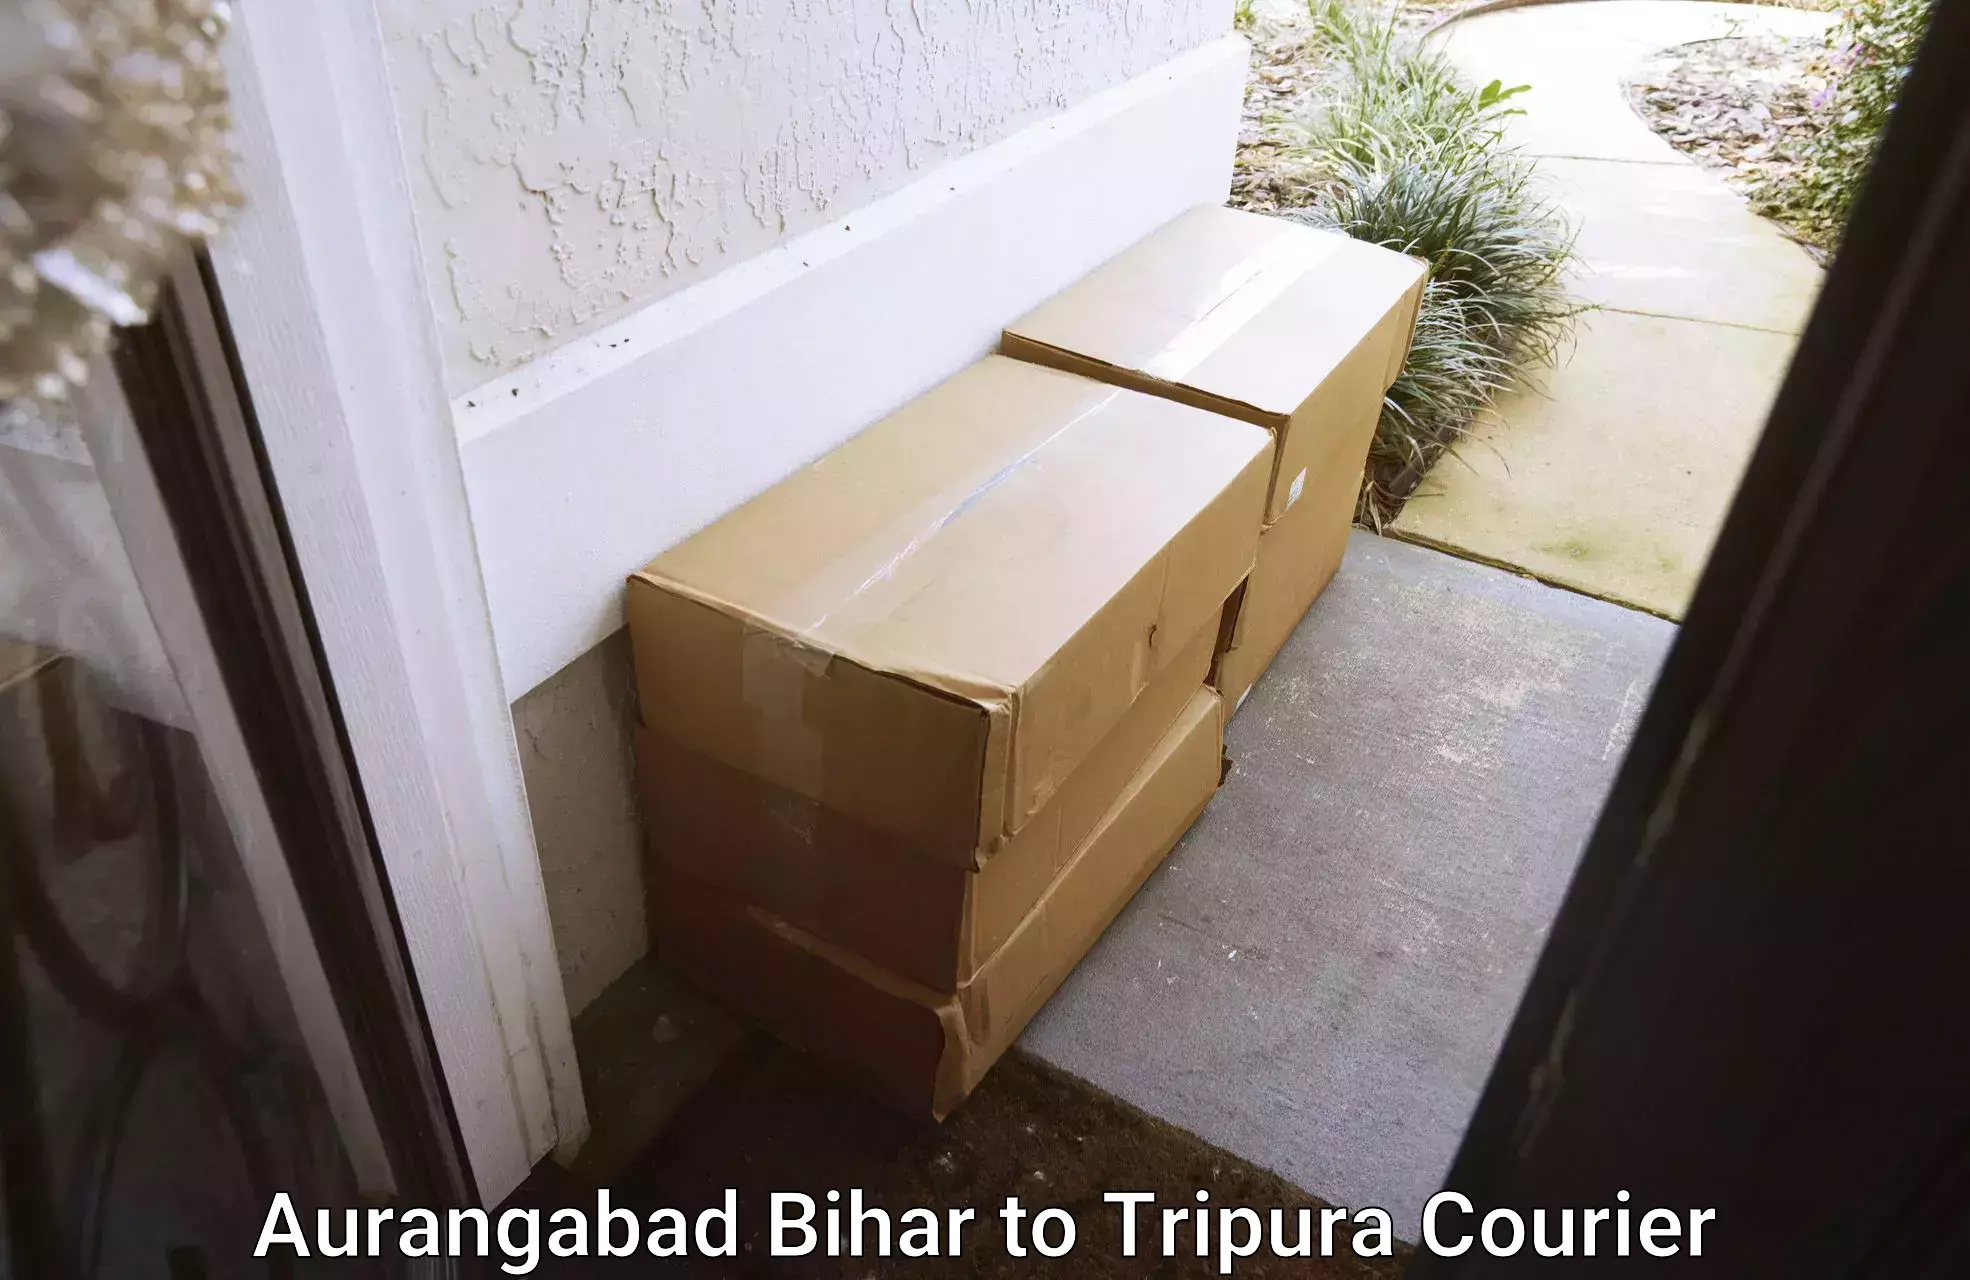 Quality moving and storage in Aurangabad Bihar to West Tripura